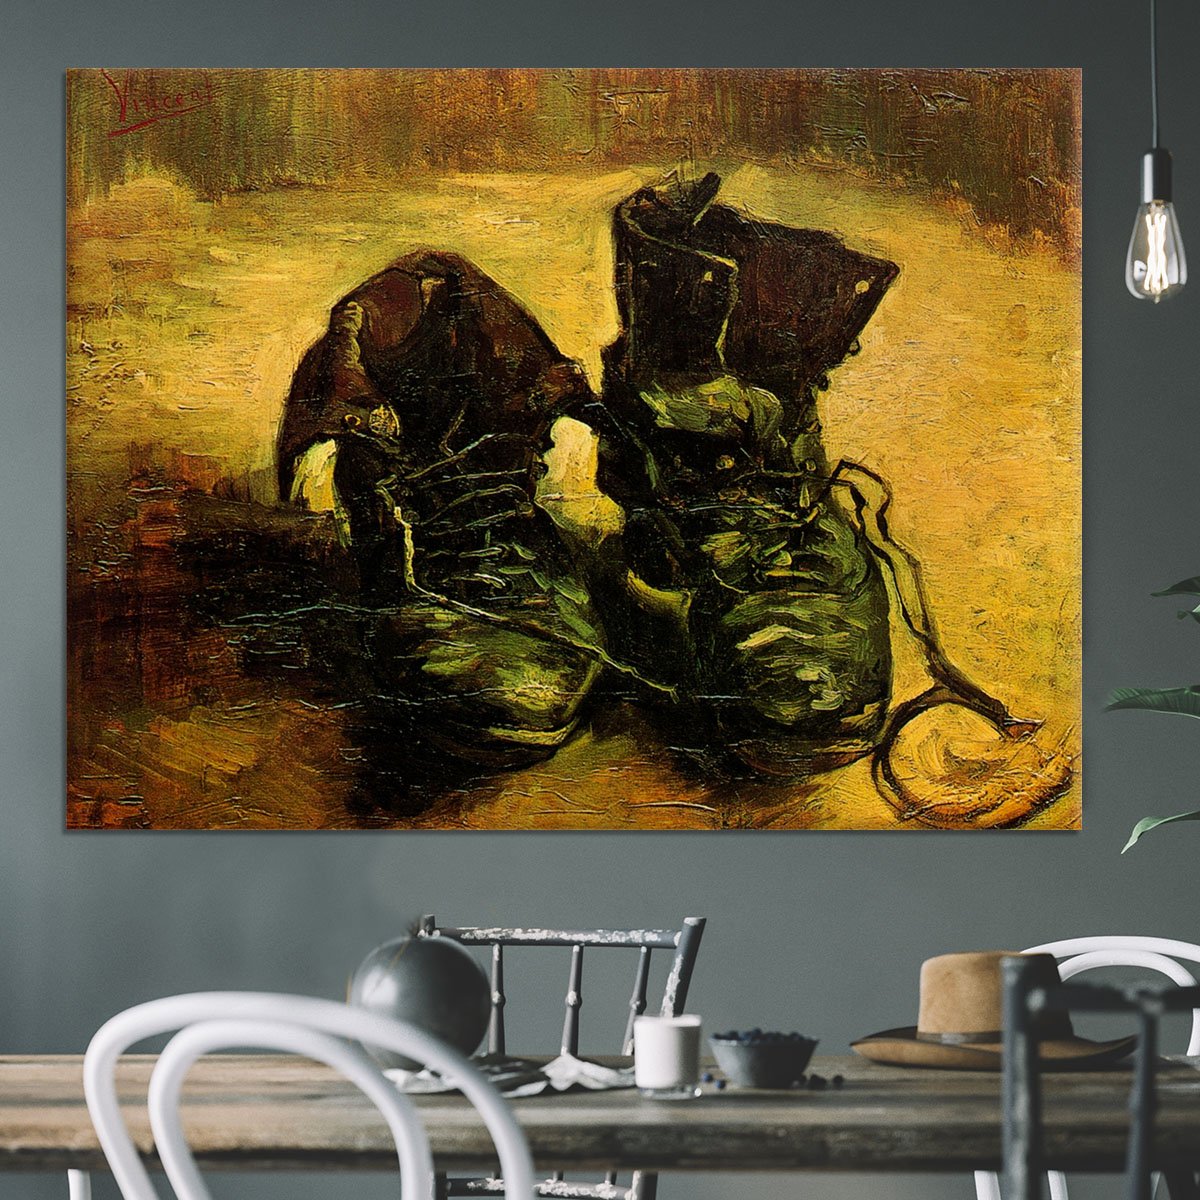 A Pair of Shoes 2 by Van Gogh Canvas Print or Poster